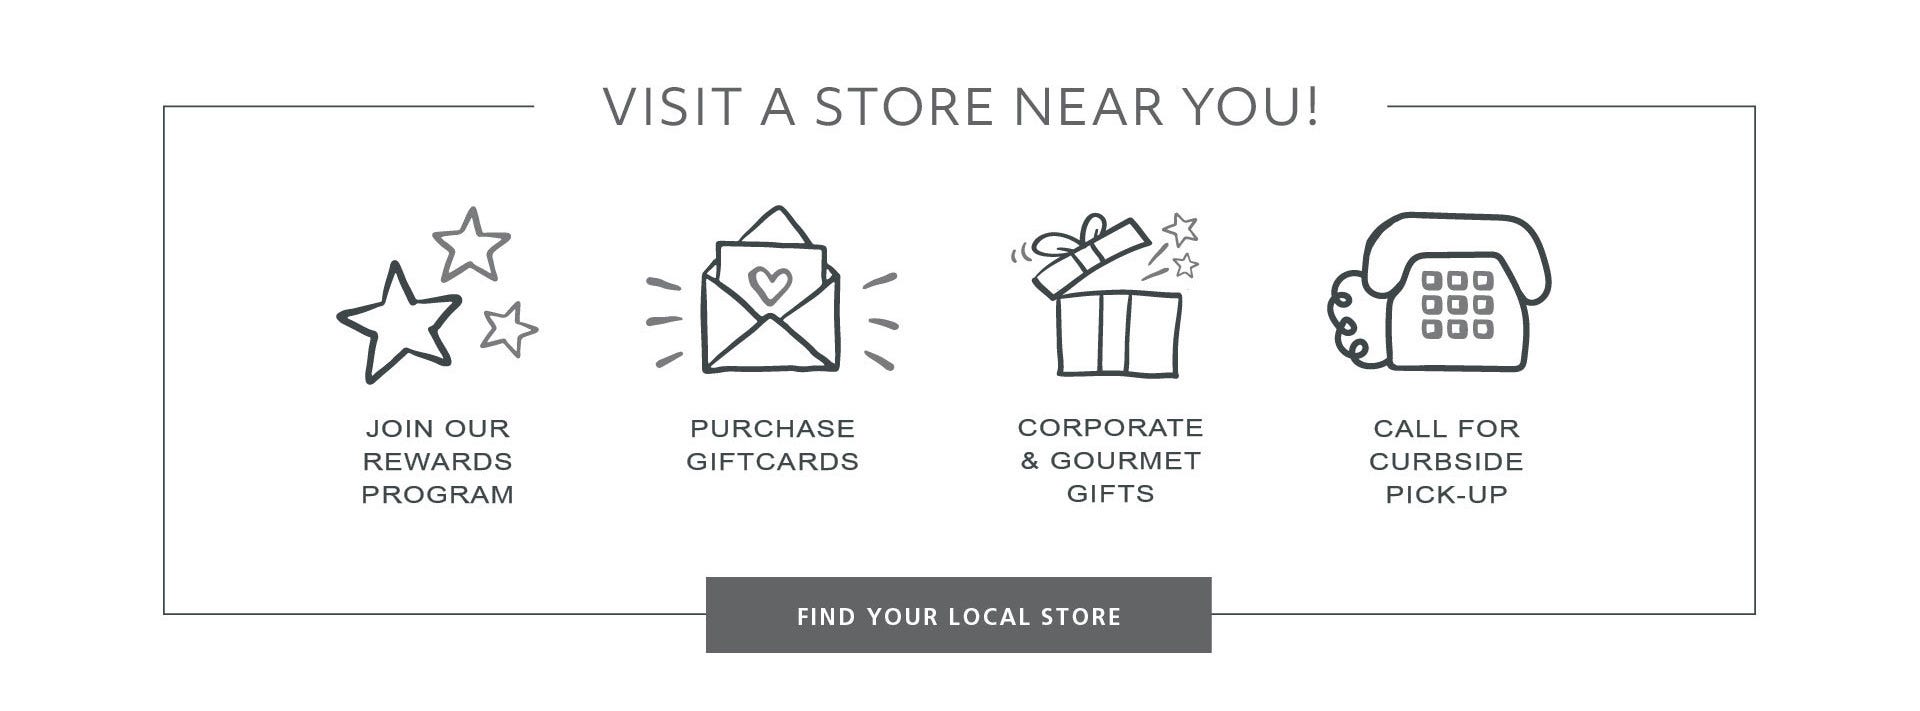 Find Your Local Store